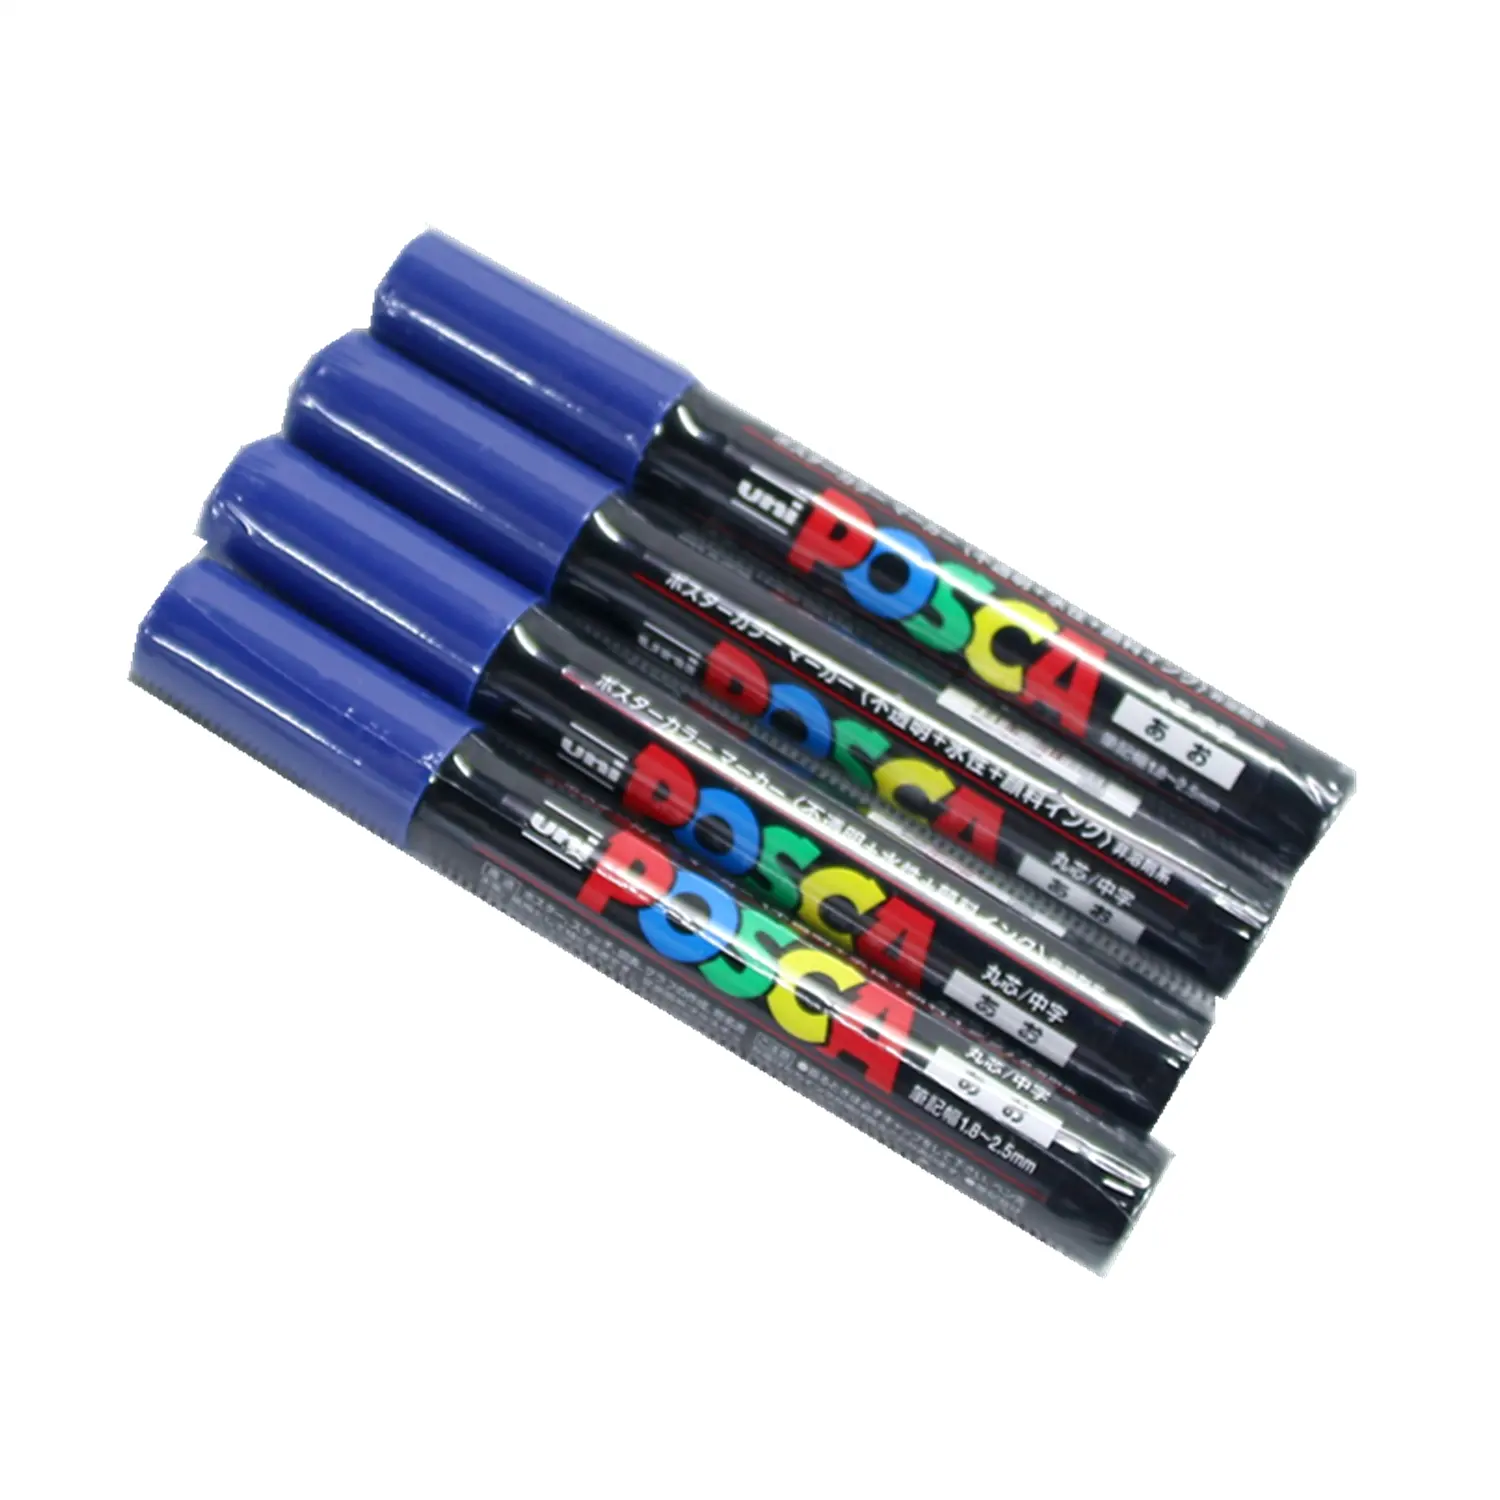 PC-5M BLUE POSCA Queen marking pen, Blue Posca Water Based, Non Toxic Paint Pen Marker for Marking Queen Bees Safely